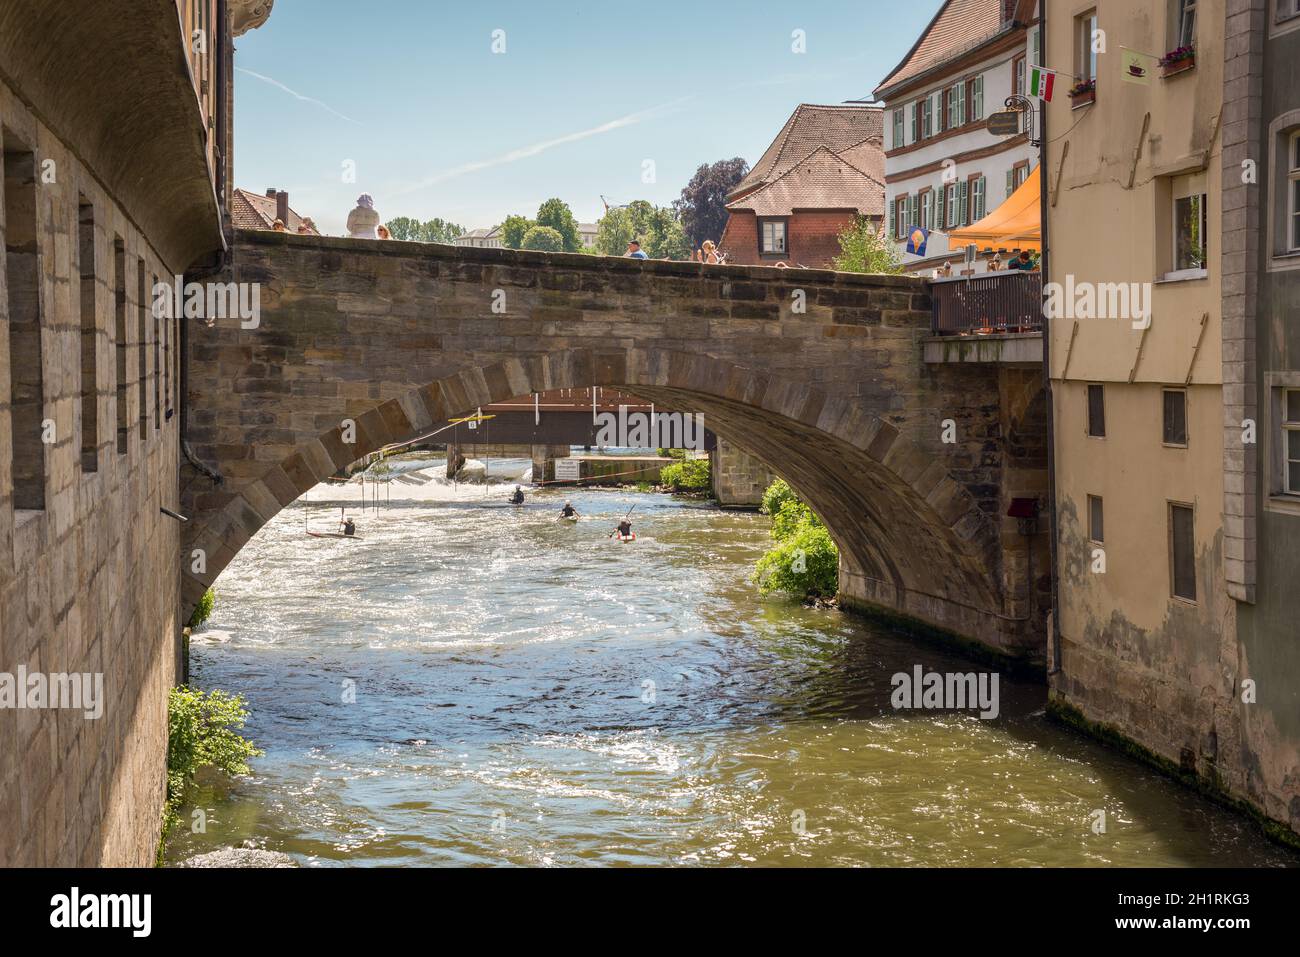 Bamberg, Germany - May 22, 2016: Old bridge over the Regnitz river in downtown of Bamberg, Upper Franconia, Bavaria, Germany. Bamberg is under UNESCO Stock Photo